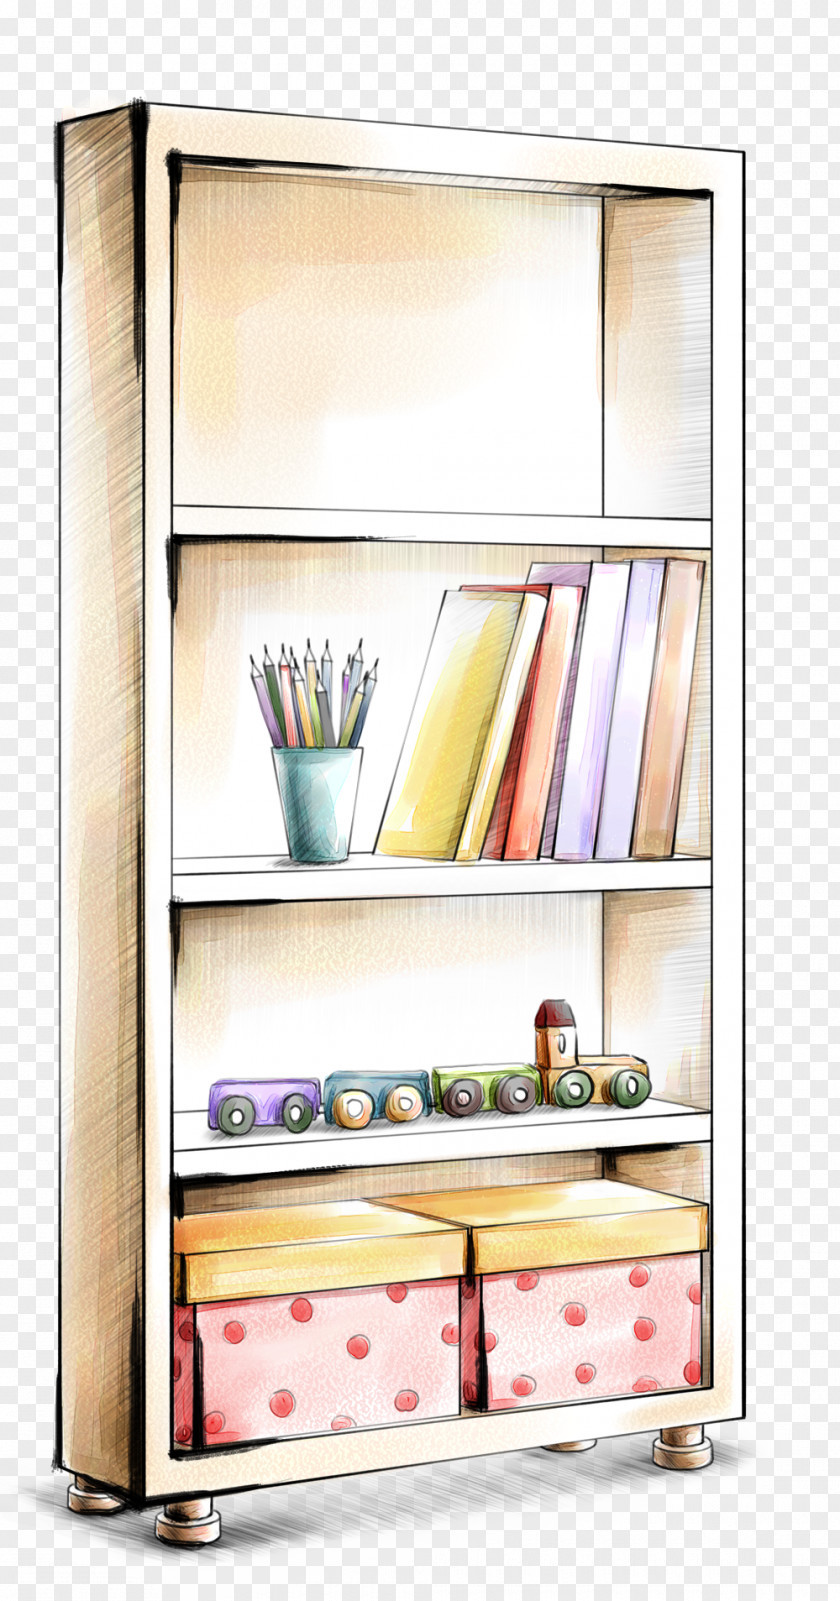 Bookcase Ornament Interior Design Services Furniture Drawing Image PNG